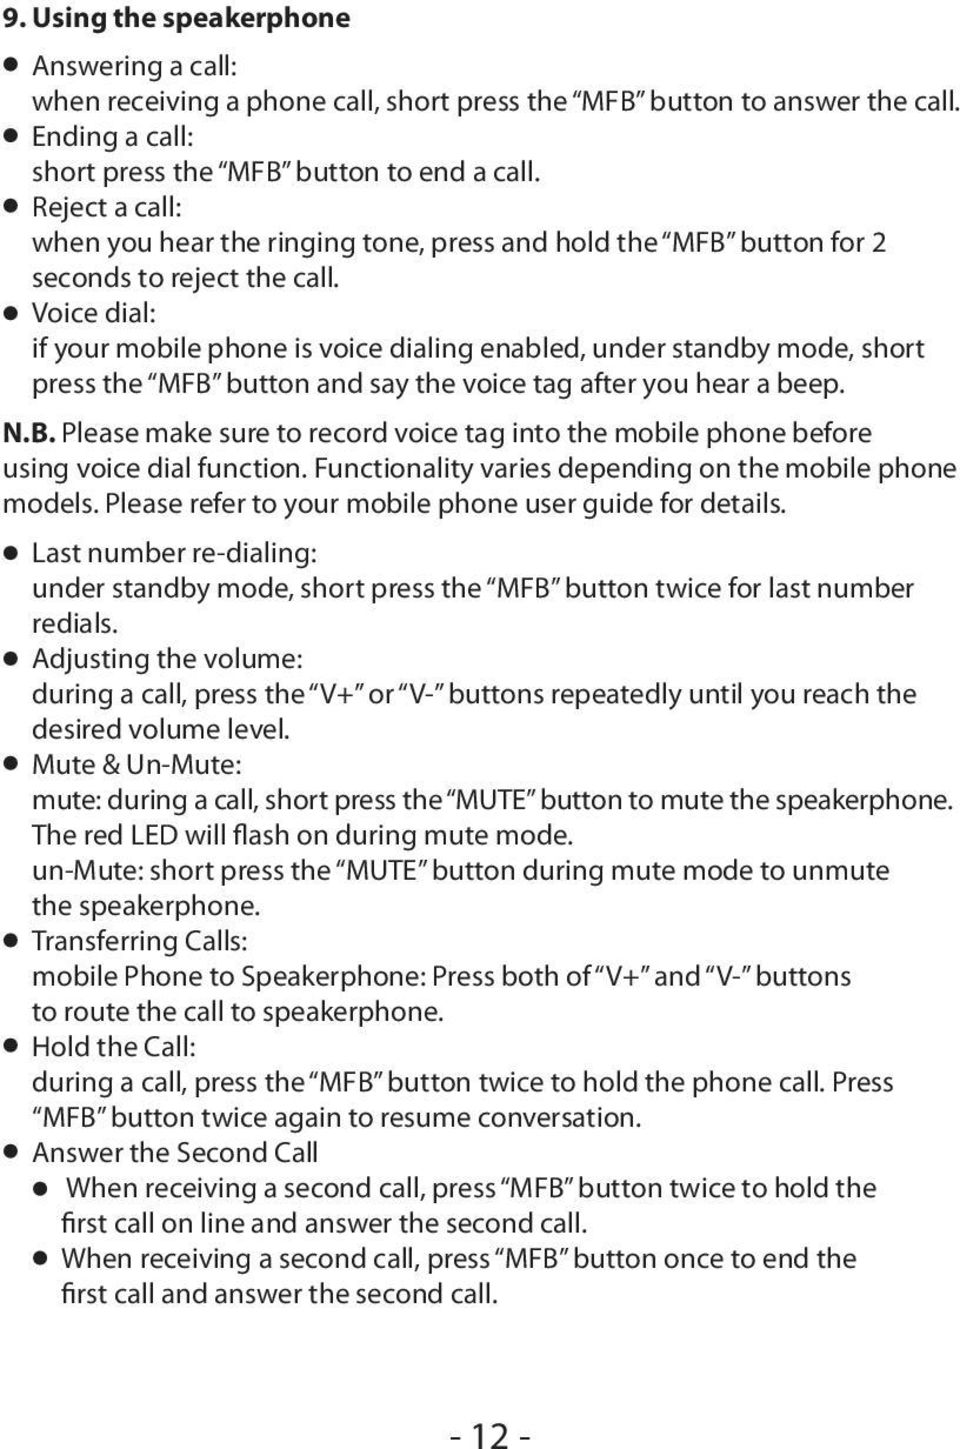 Voice dial: if your mobile phone is voice dialing enabled, under standby mode, short press the MFB button and say the voice tag after you hear a beep. N.B. Please make sure to record voice tag into the mobile phone before using voice dial function.